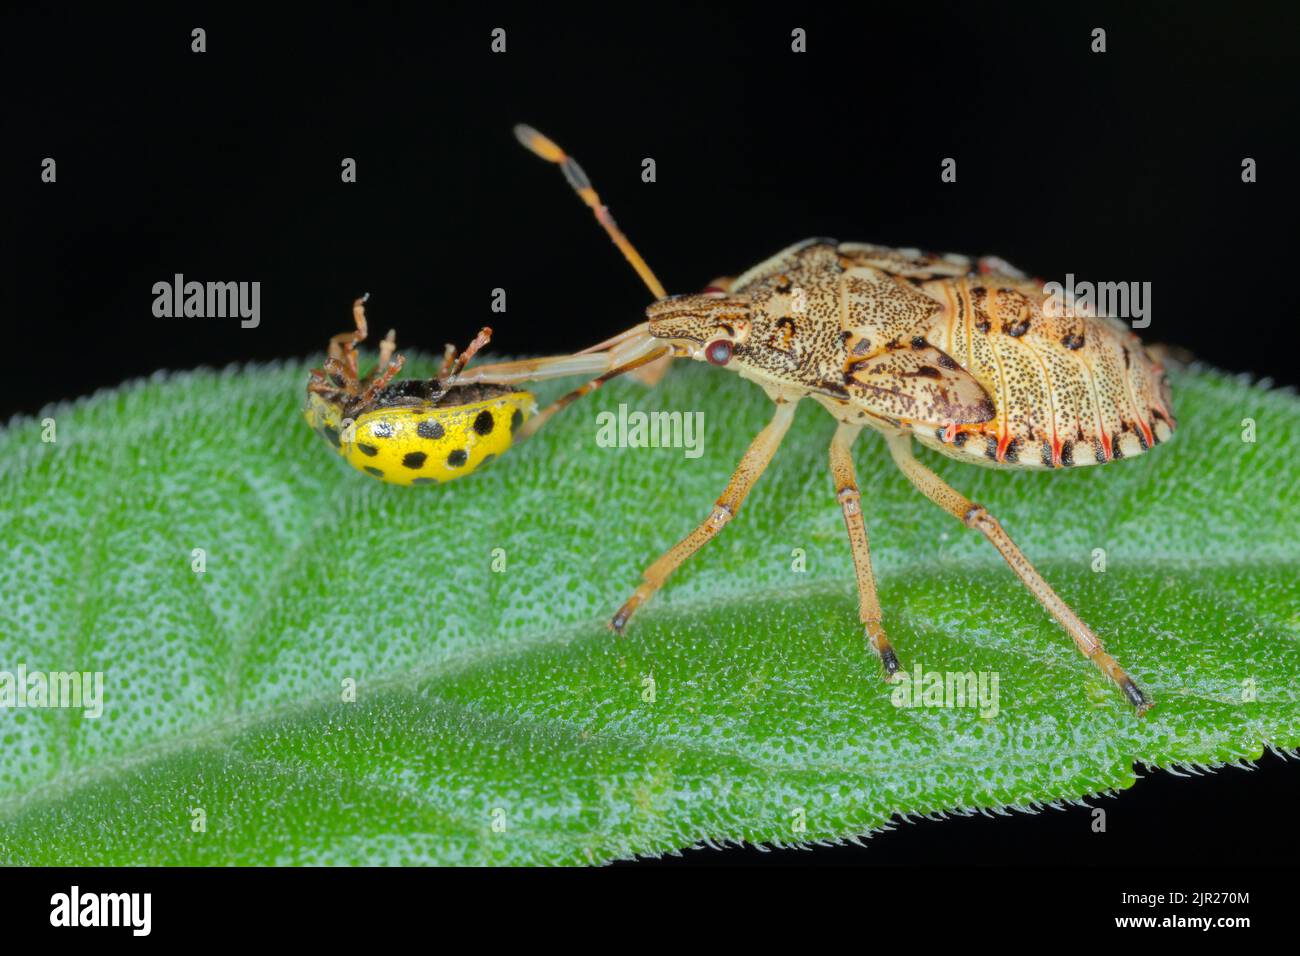 Nymph, the larva of an insect of the family Pentatomidae (shield bug) with a hunted ladybug. Stock Photo